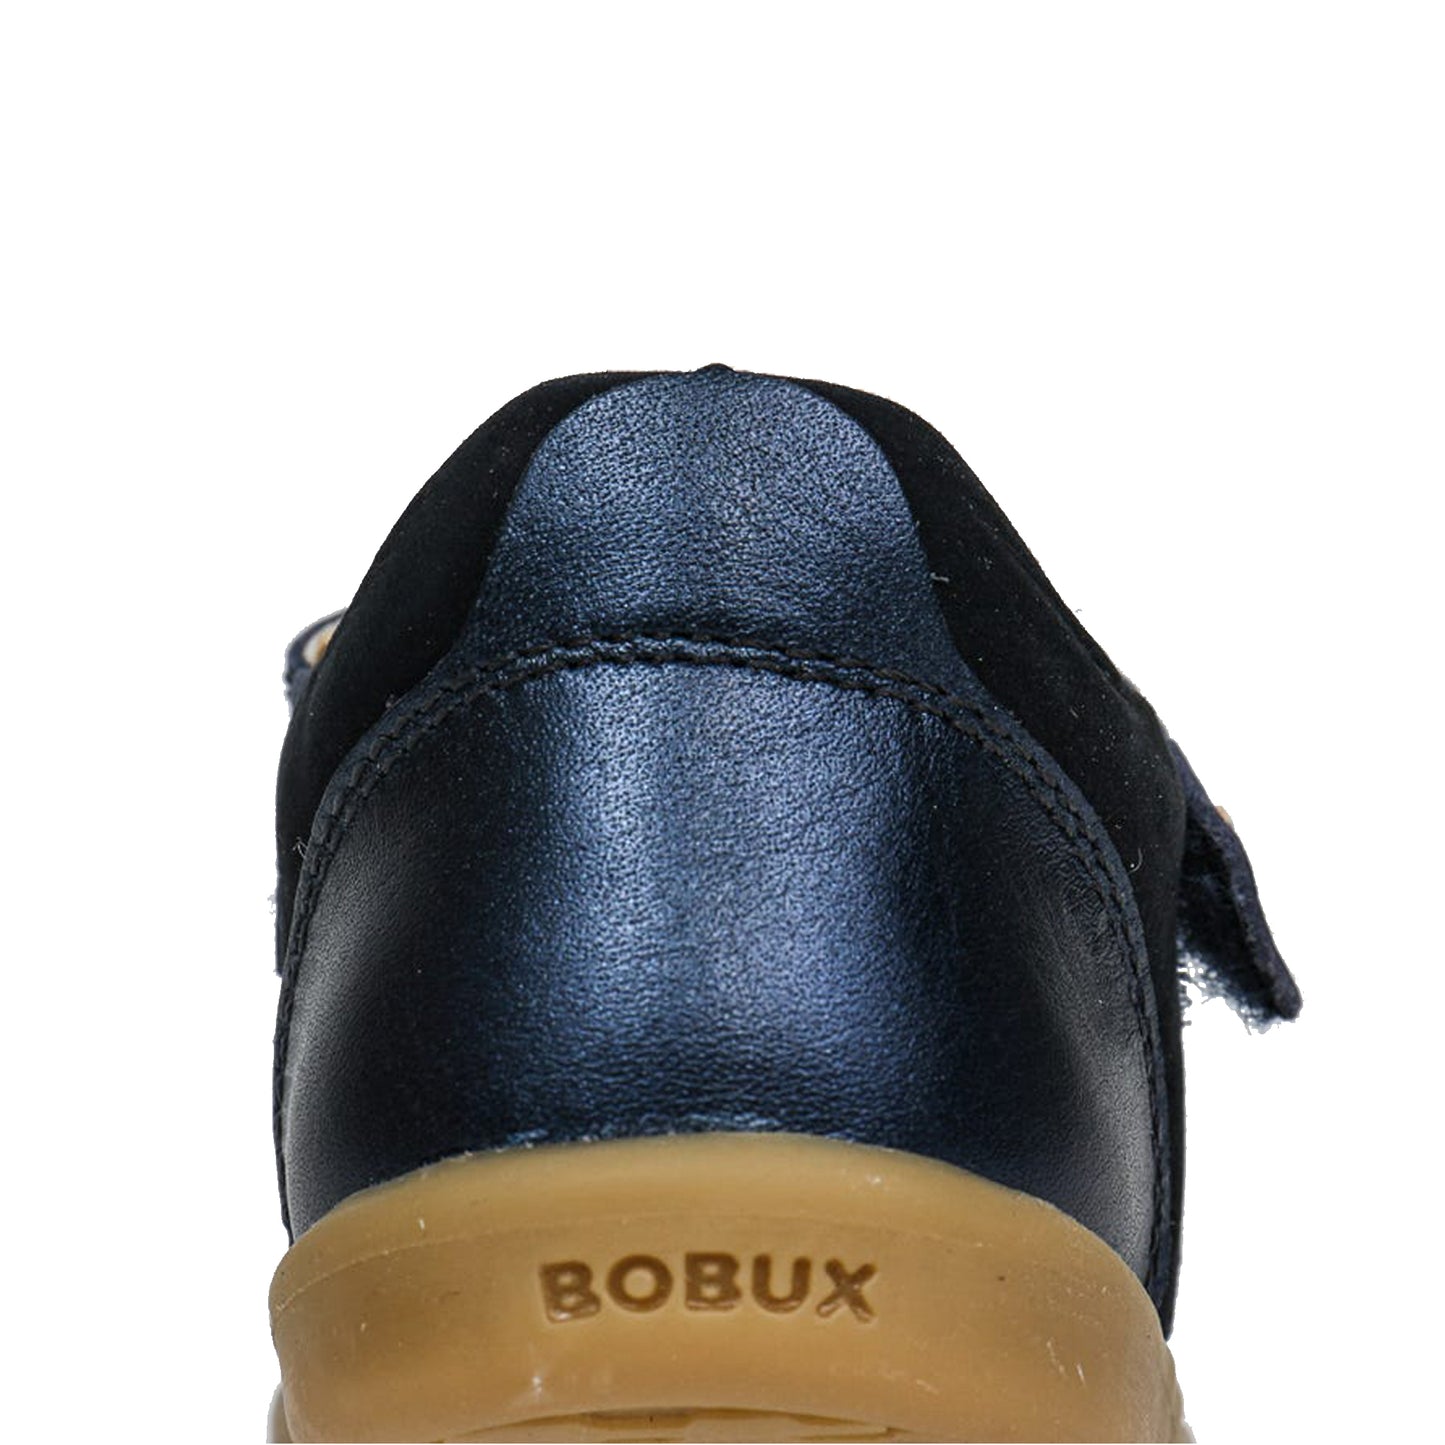 IW Louise T-bar Shoe Navy Shimmer Leather